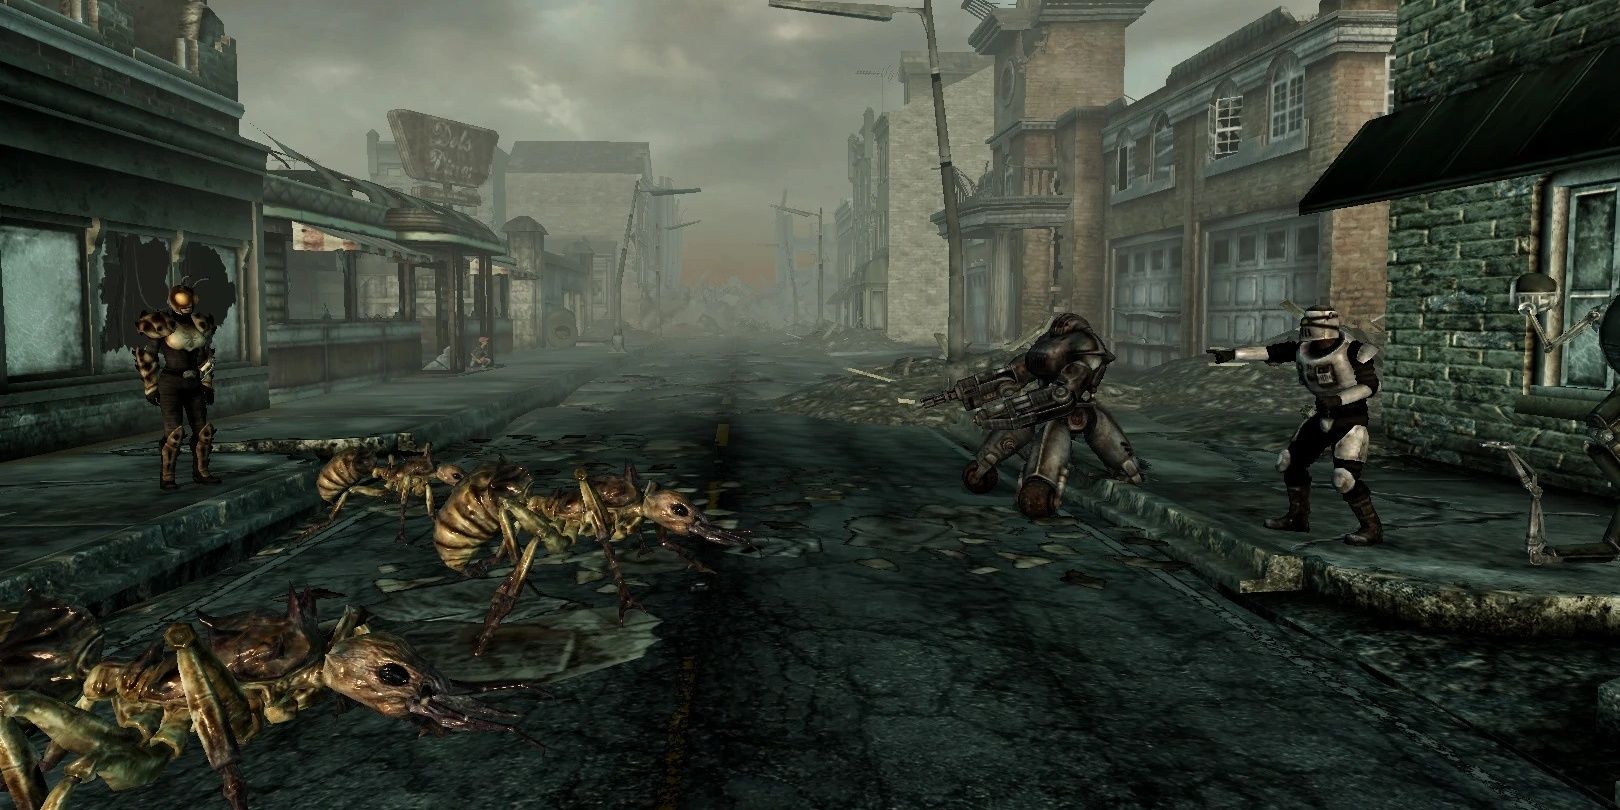 Ant Attack From Fallout 3